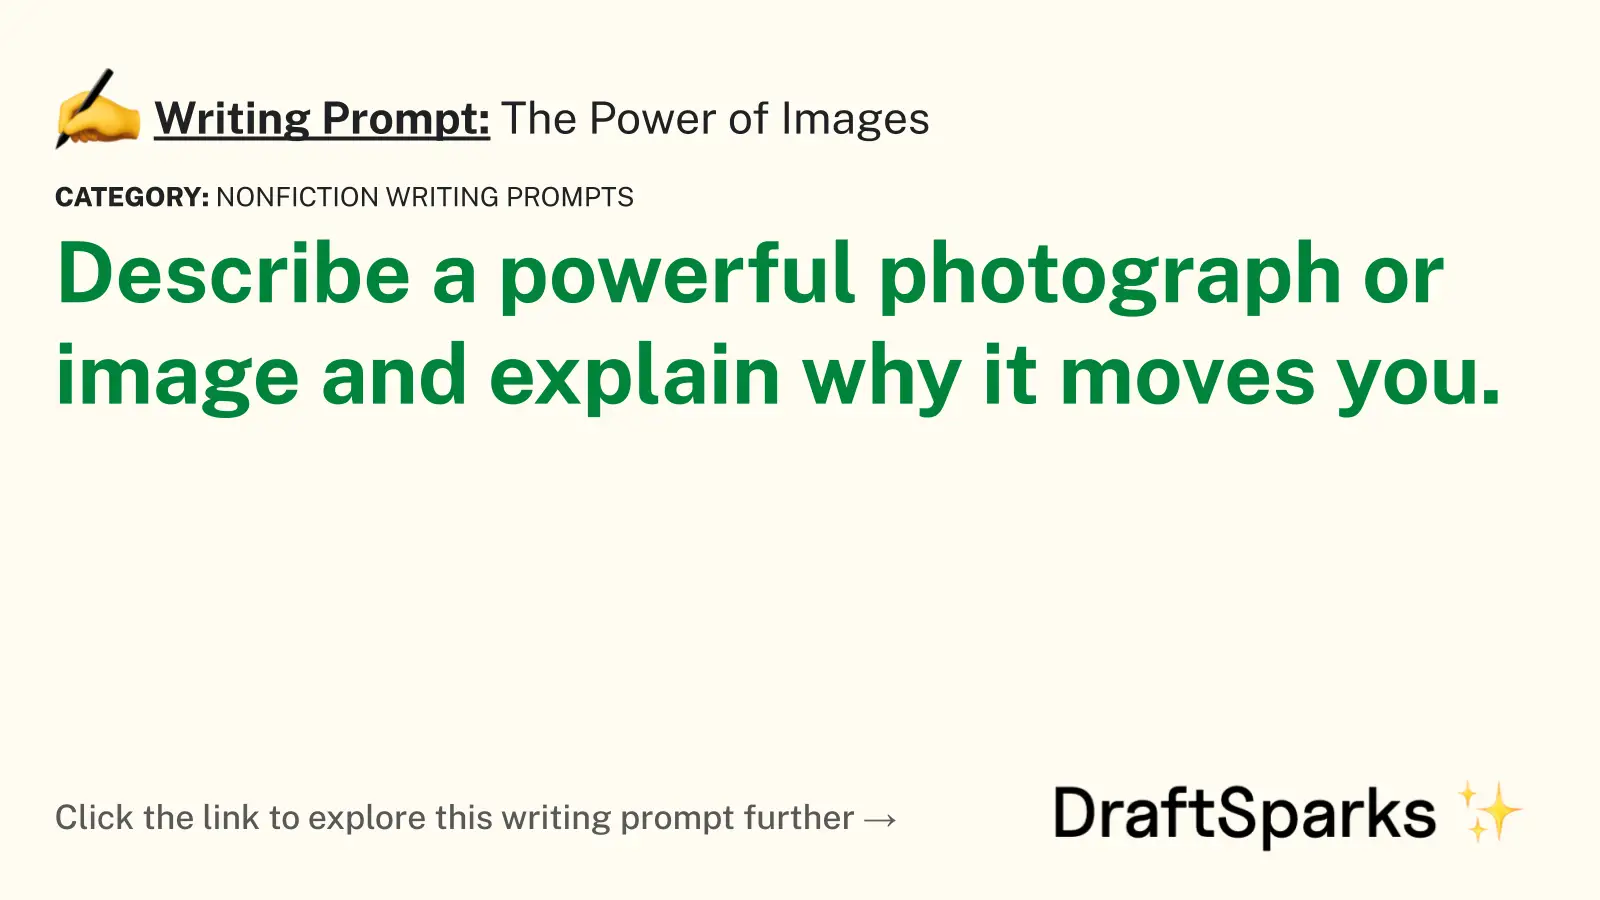 The Power of Images